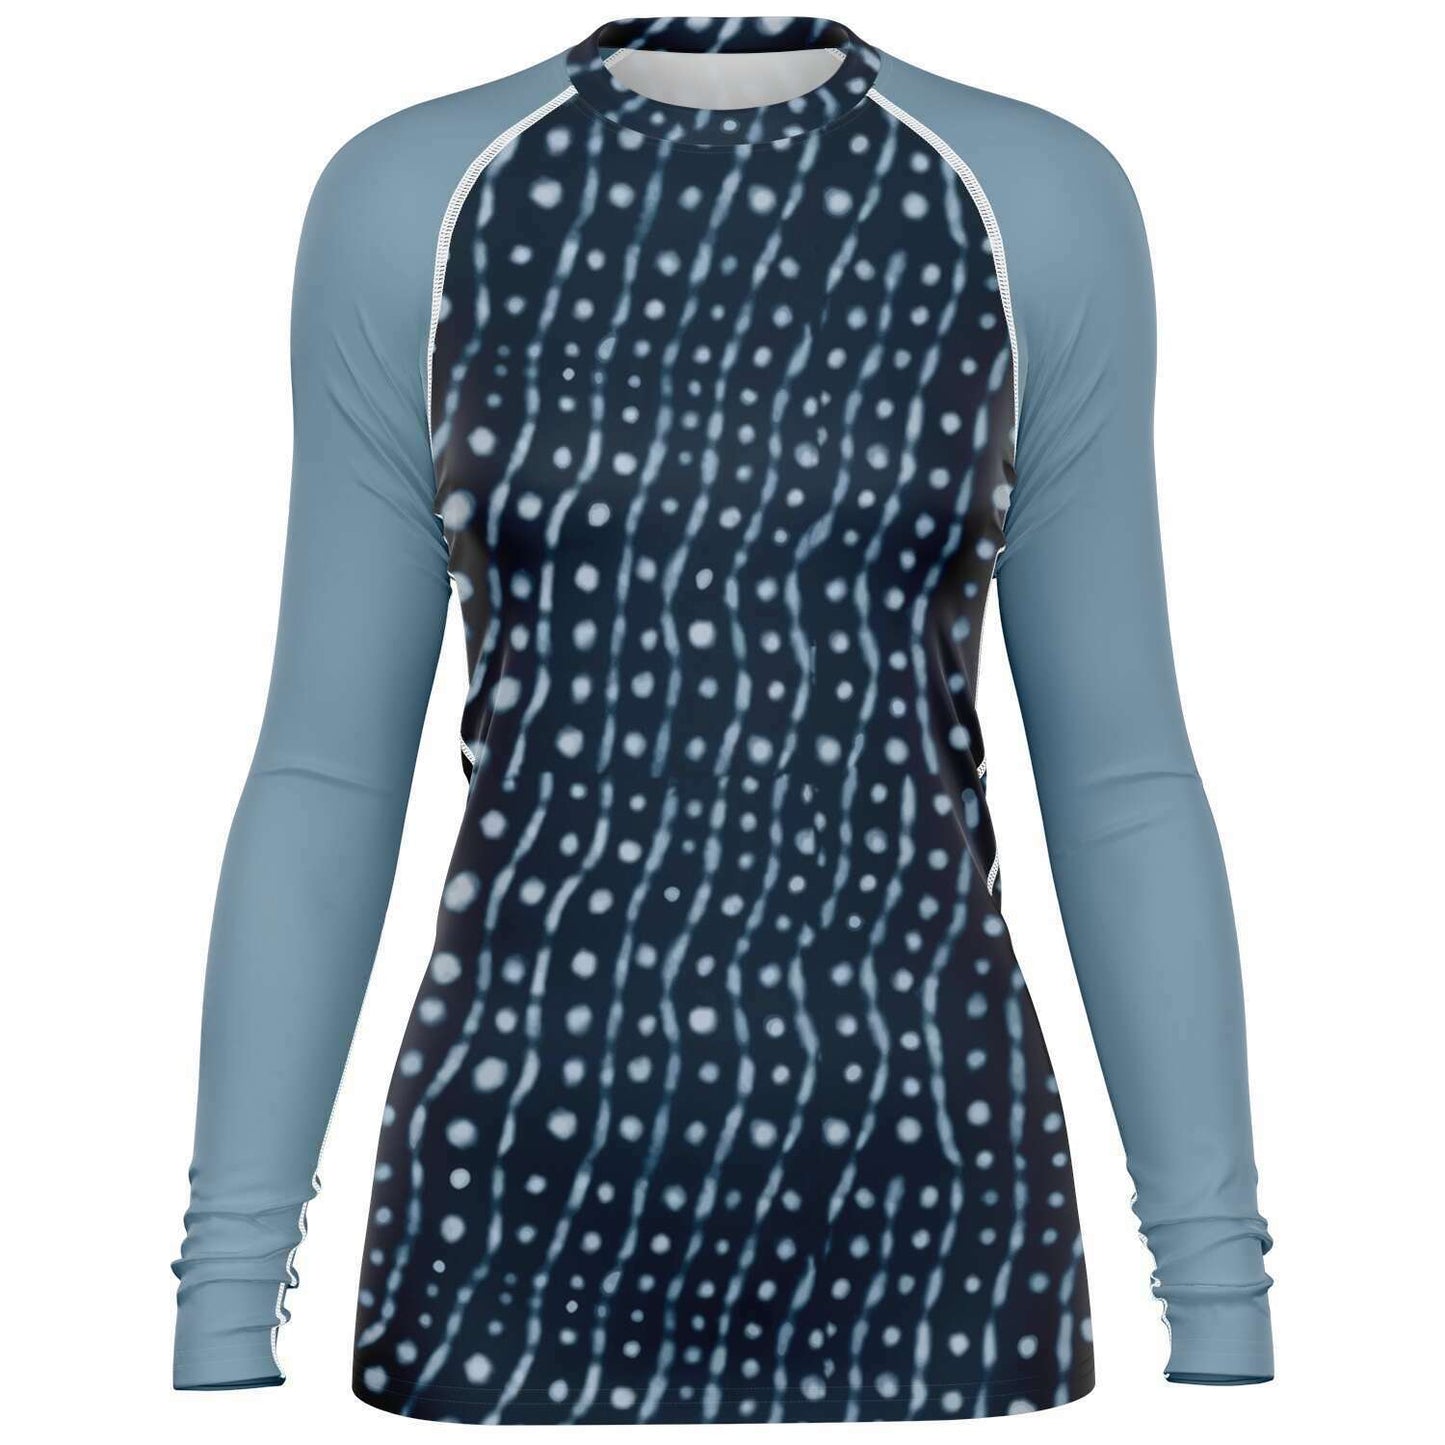 Where to get women's whale shark wetsuits, rash vests and leggings